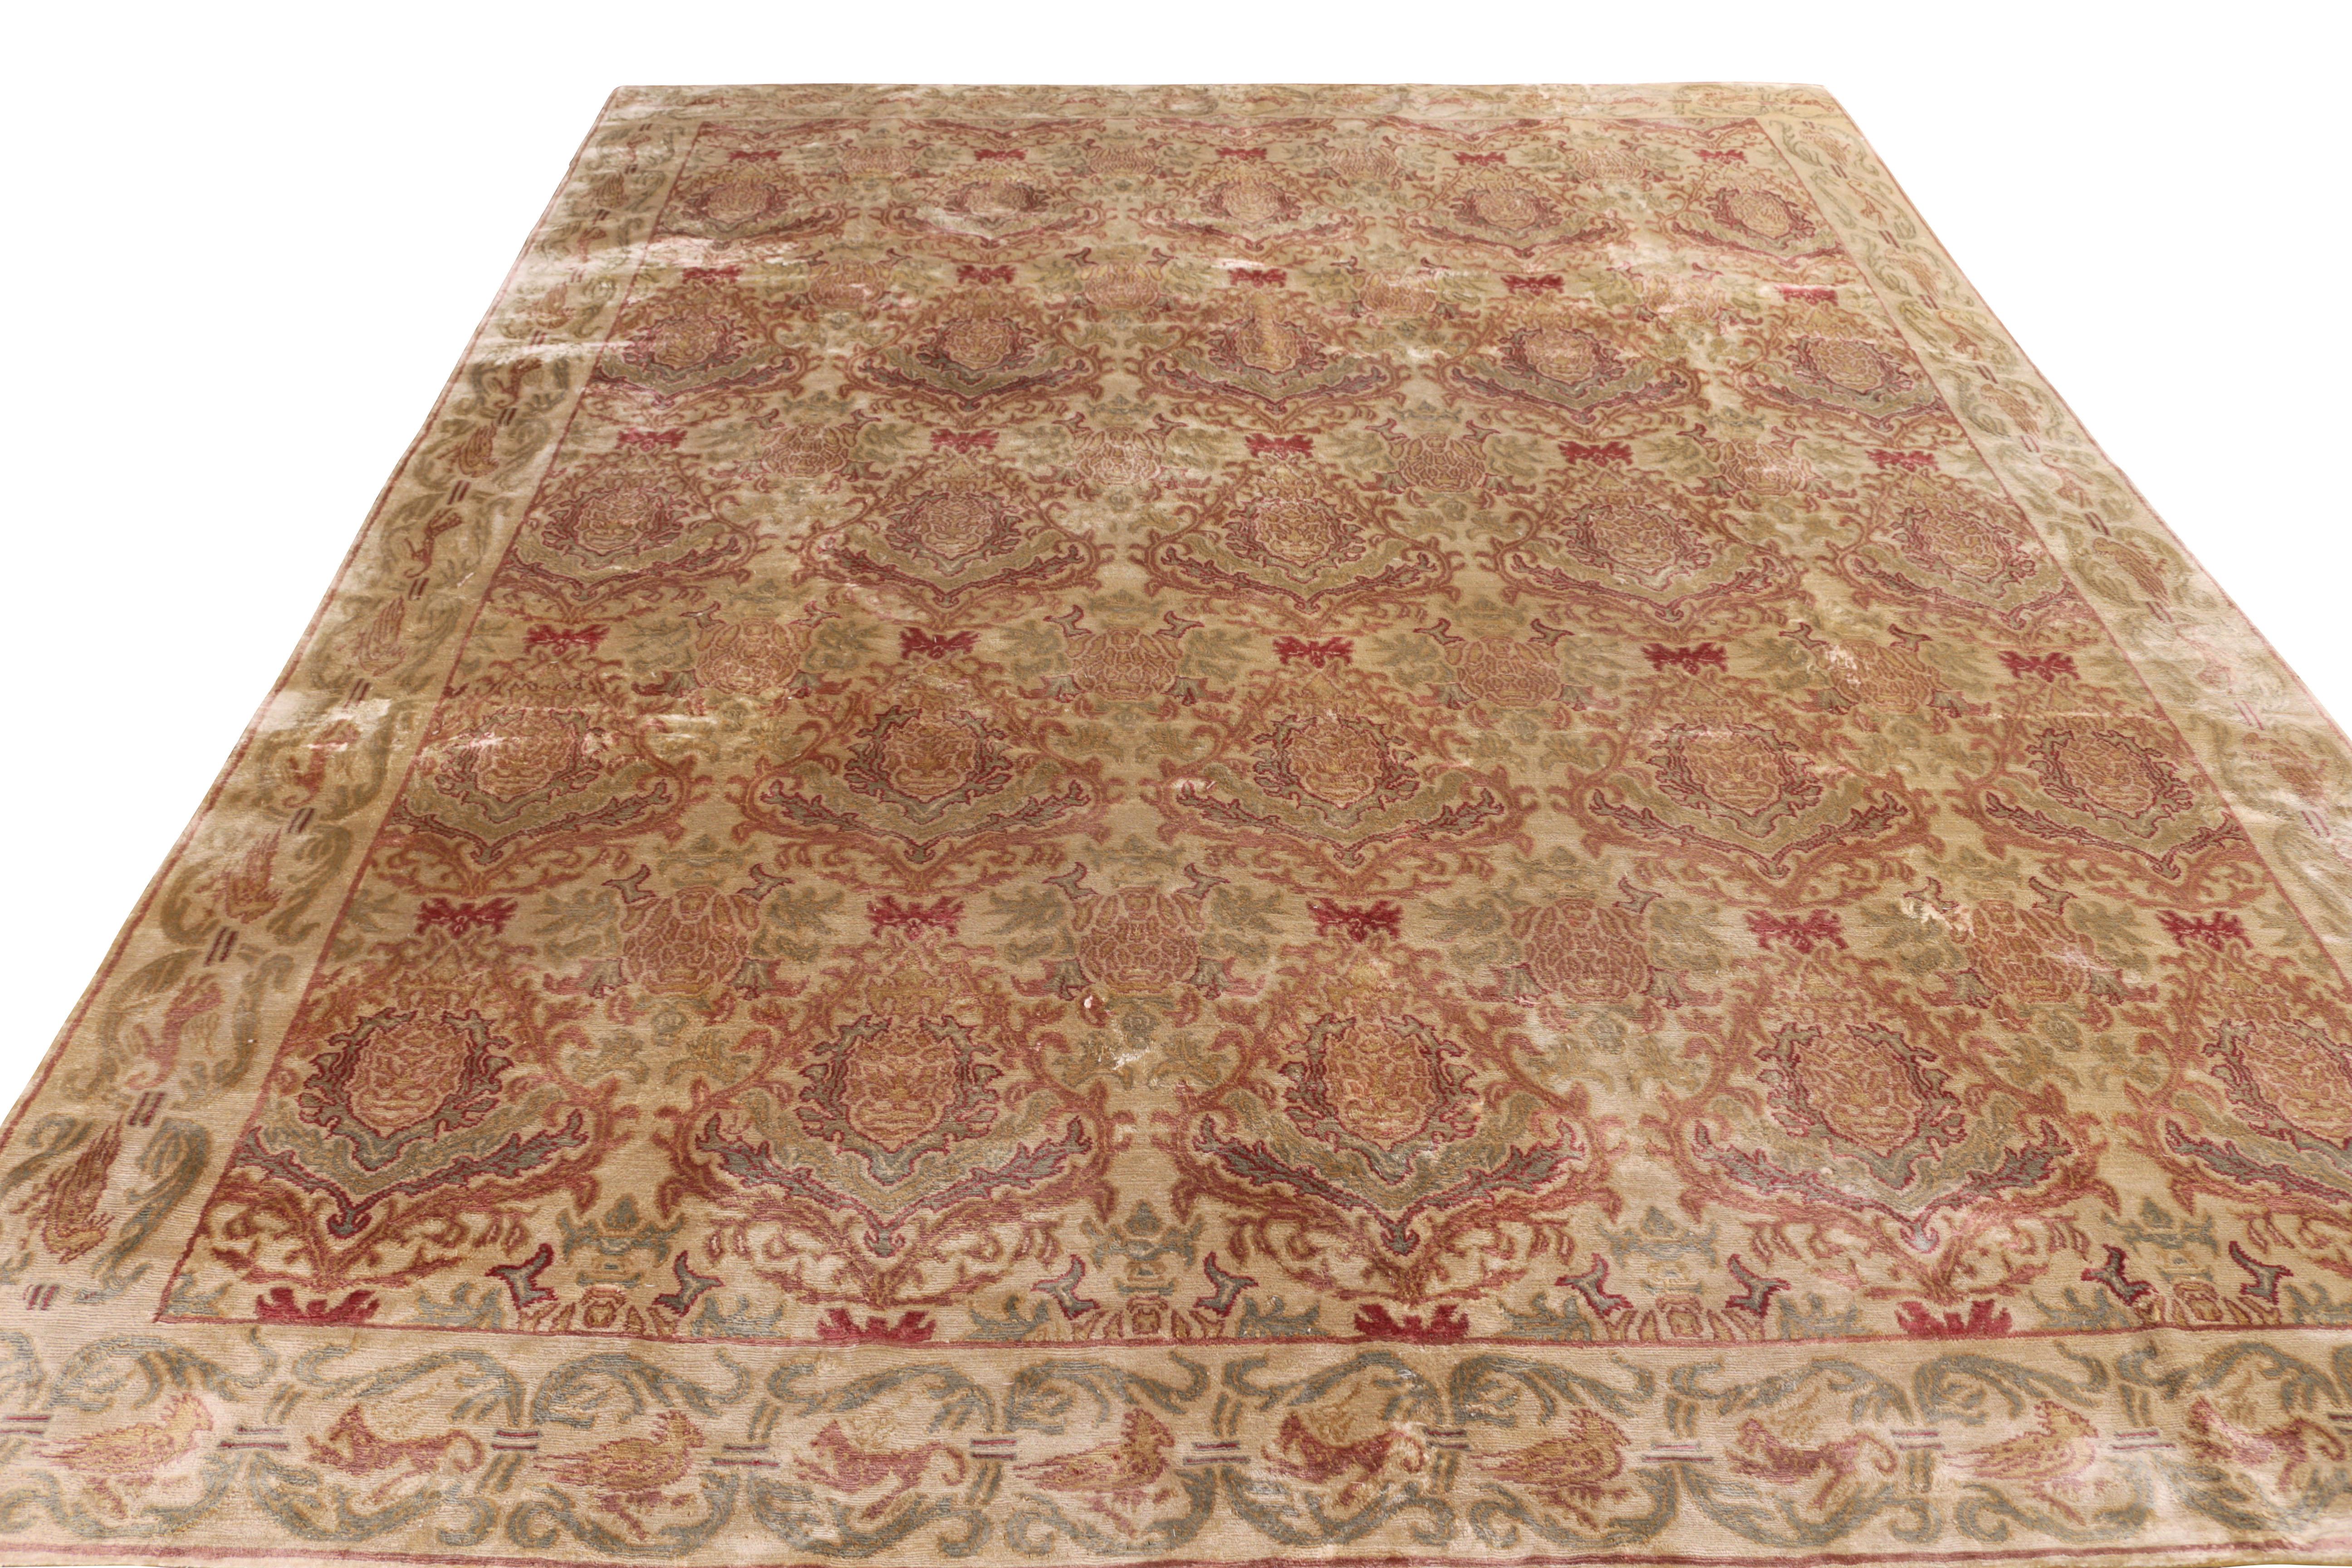 Hand-knotted in pure 100% silk originating from one of our most reputed partner looms in Nepal, this 9 x 12 addition to the European rug collection by Rug & Kilim enjoys a grand approach to repetition in the play of lustrous, rustically charming